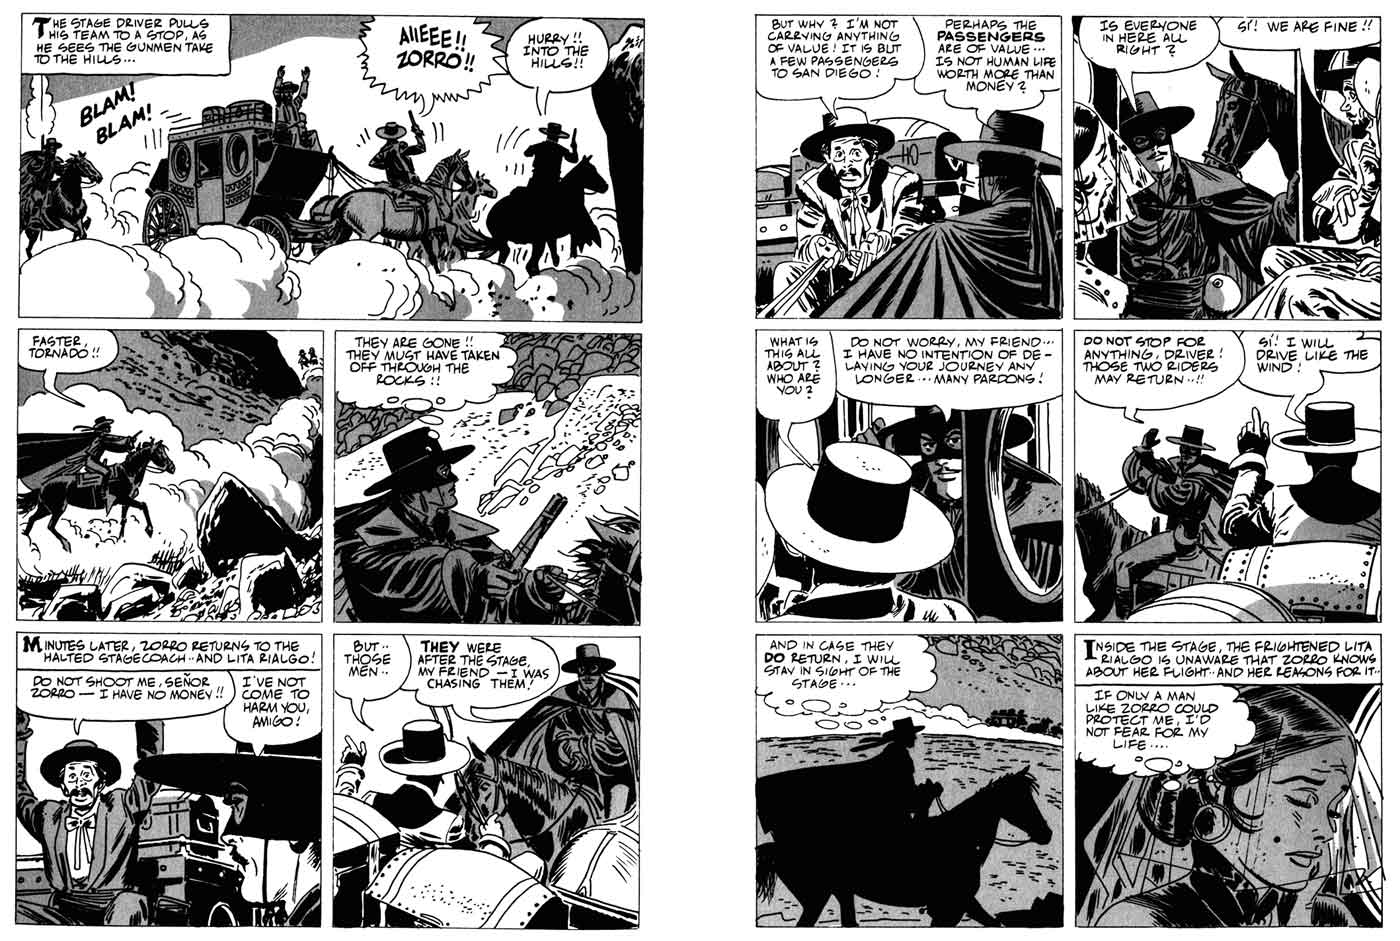 Two pages from "Runaway Witness" with art by Alex Toth